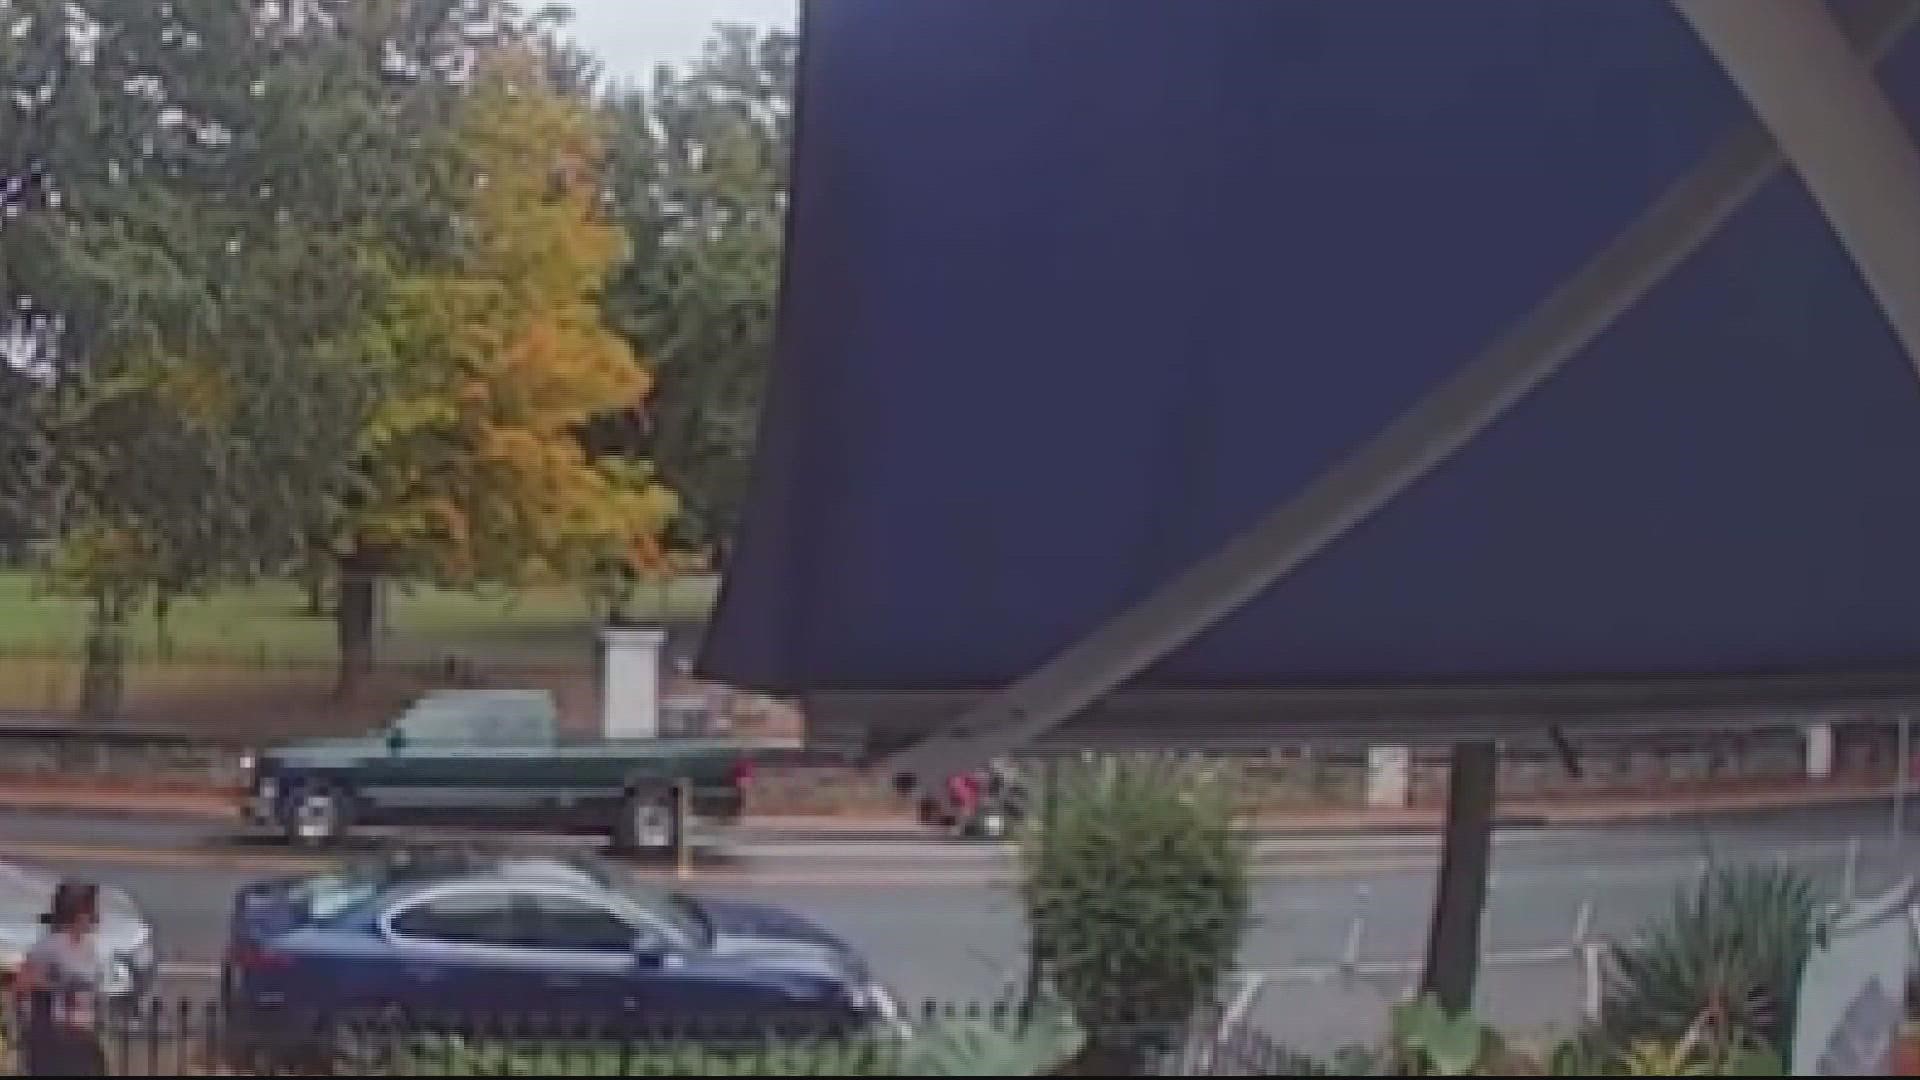 An exclusive look at the moment a truck hit a father and son riding on a moped - and drove off.